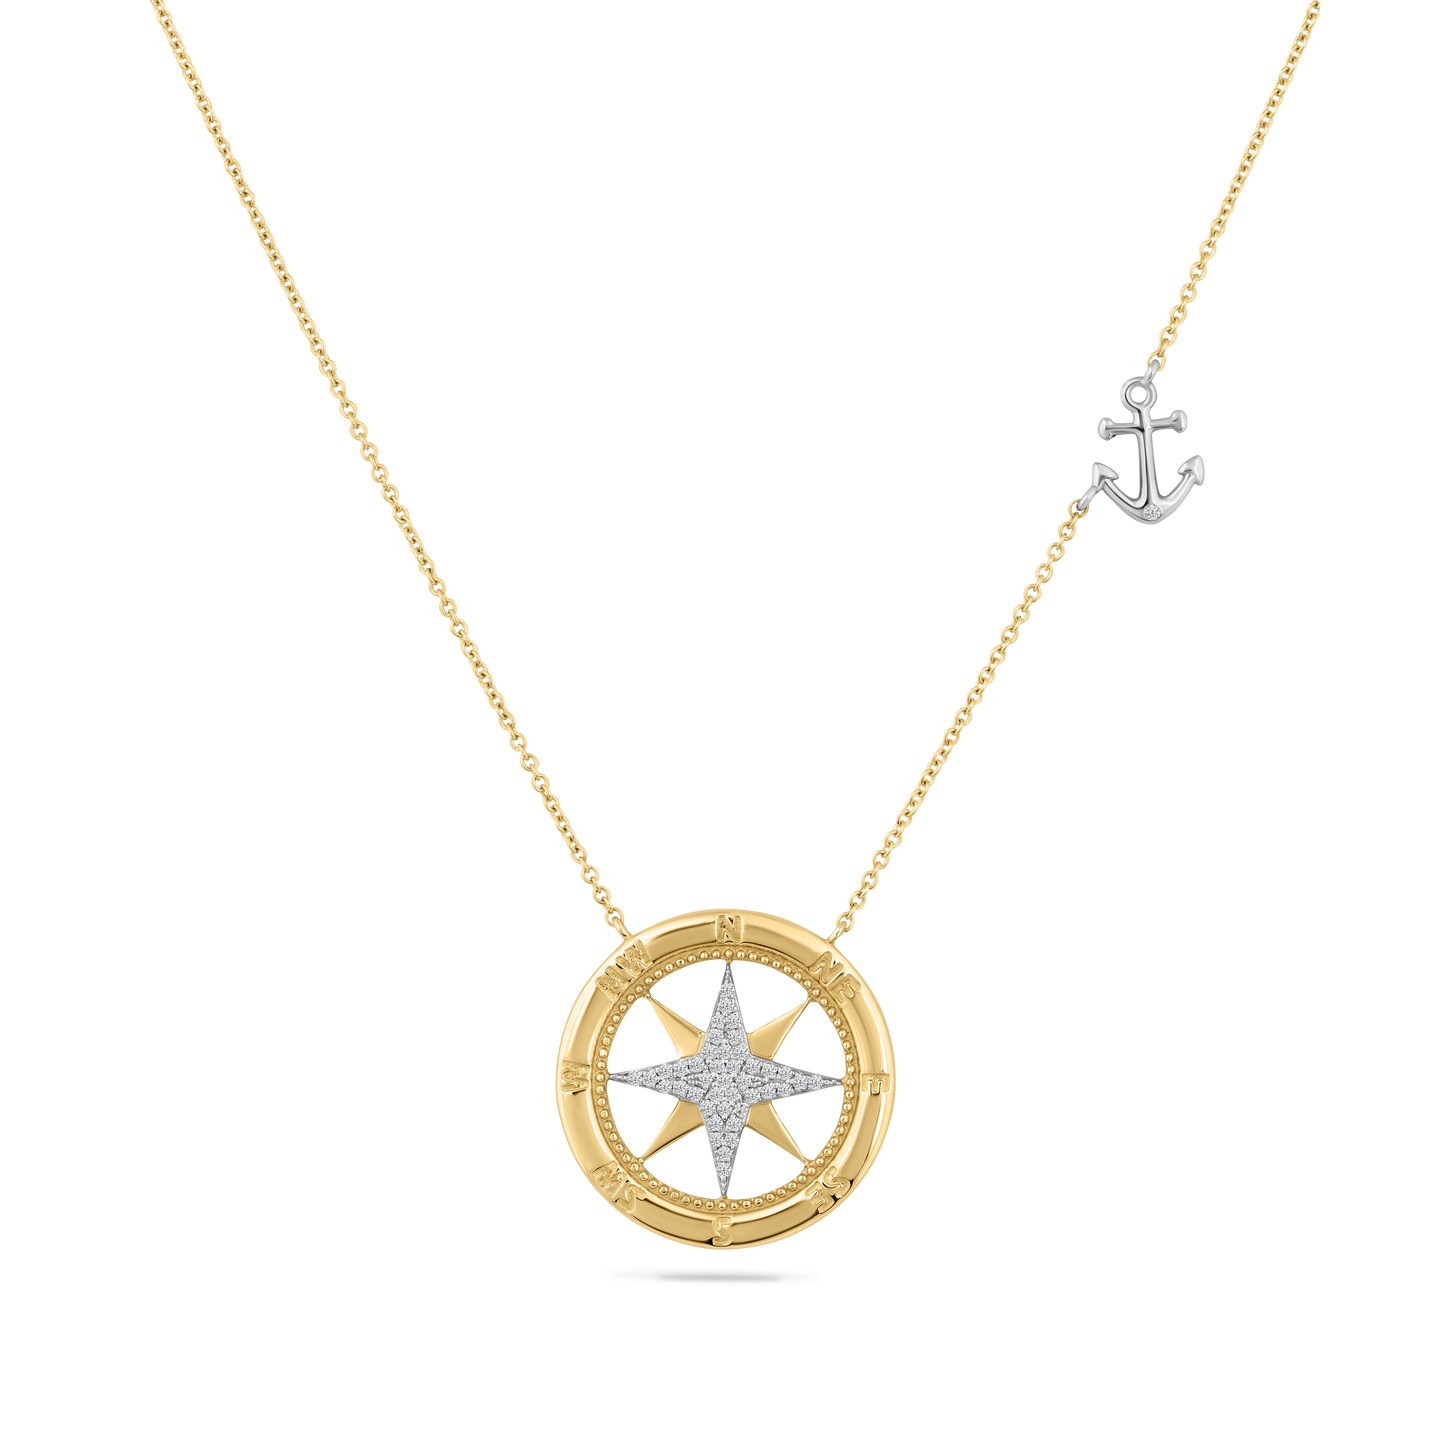 14K COMPASS NECKLACE 42 DIAMONDS 0.13CT 18 INCHES CHAIN